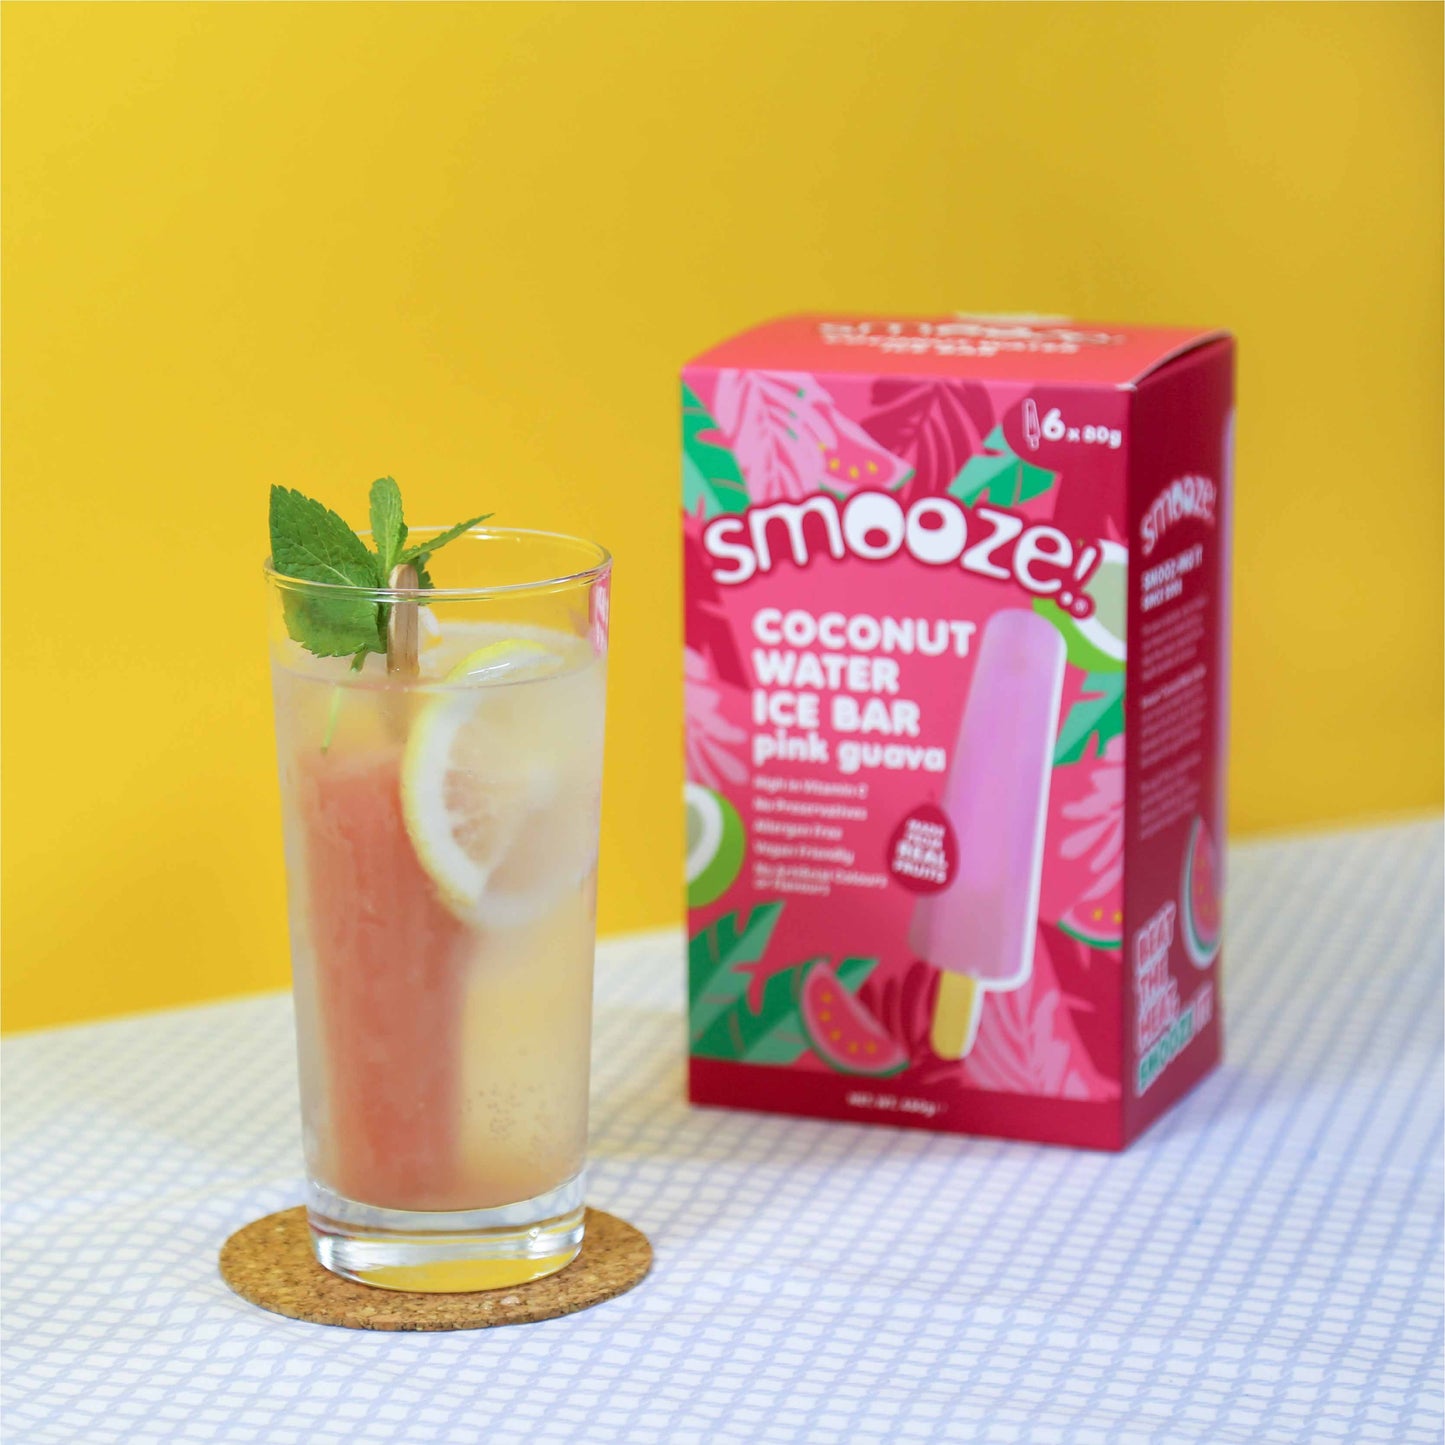 Smooze!™ Coconut Water Ice Bar - Pink Guava